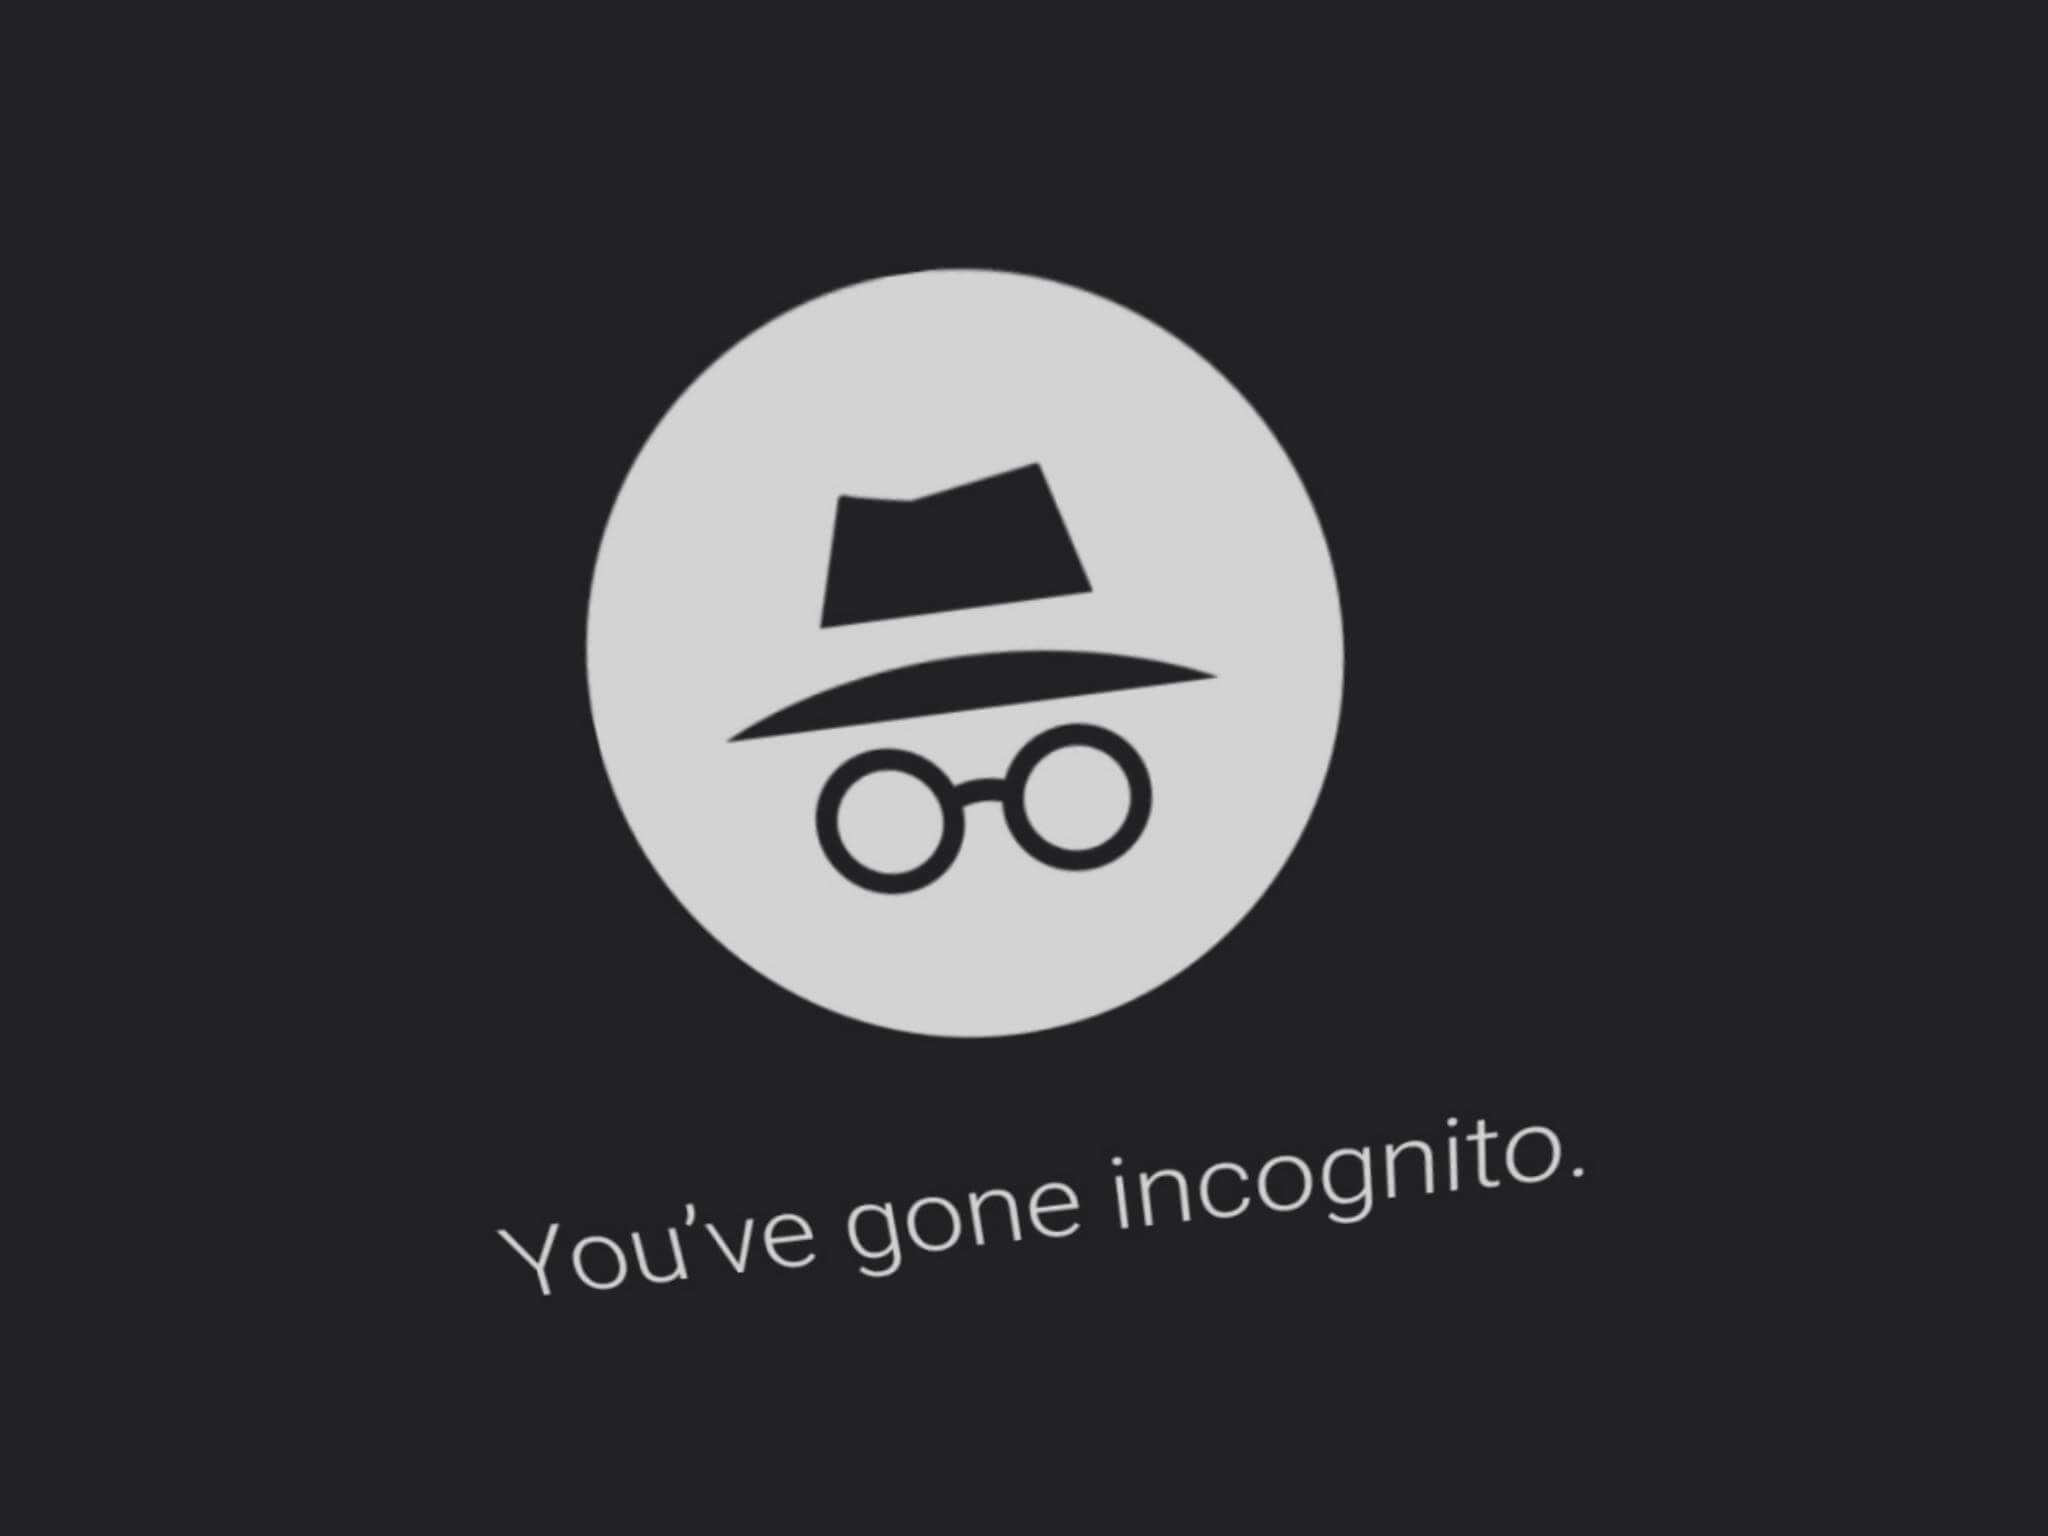 Chrome browser patch will close loophole used to block Incognito mode